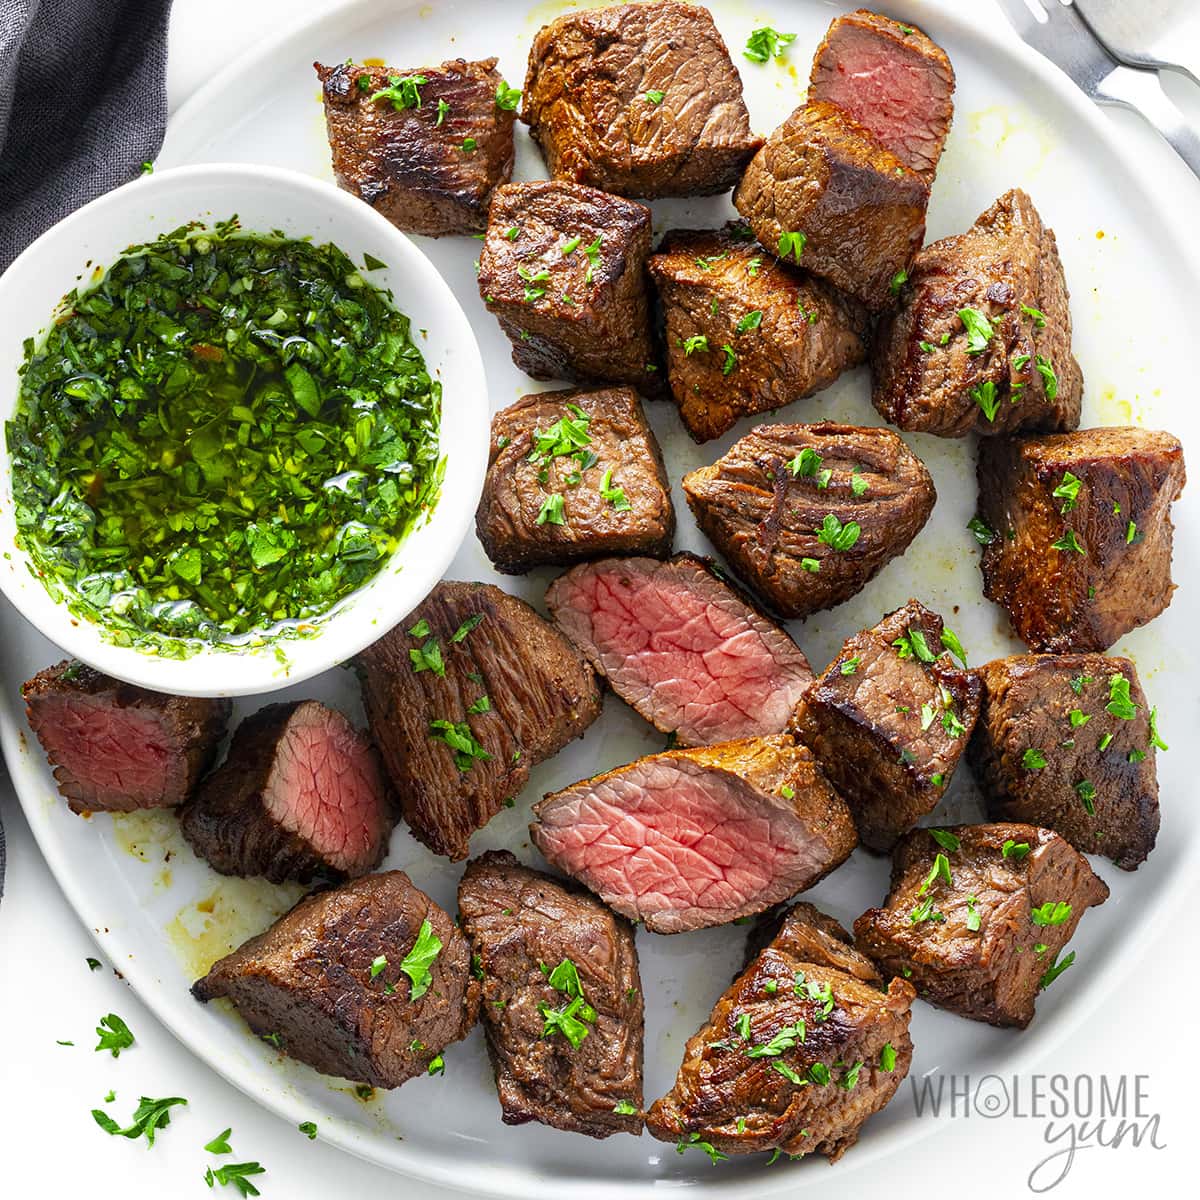 Sirloin steak tips with chimichurri sauce on a plate.